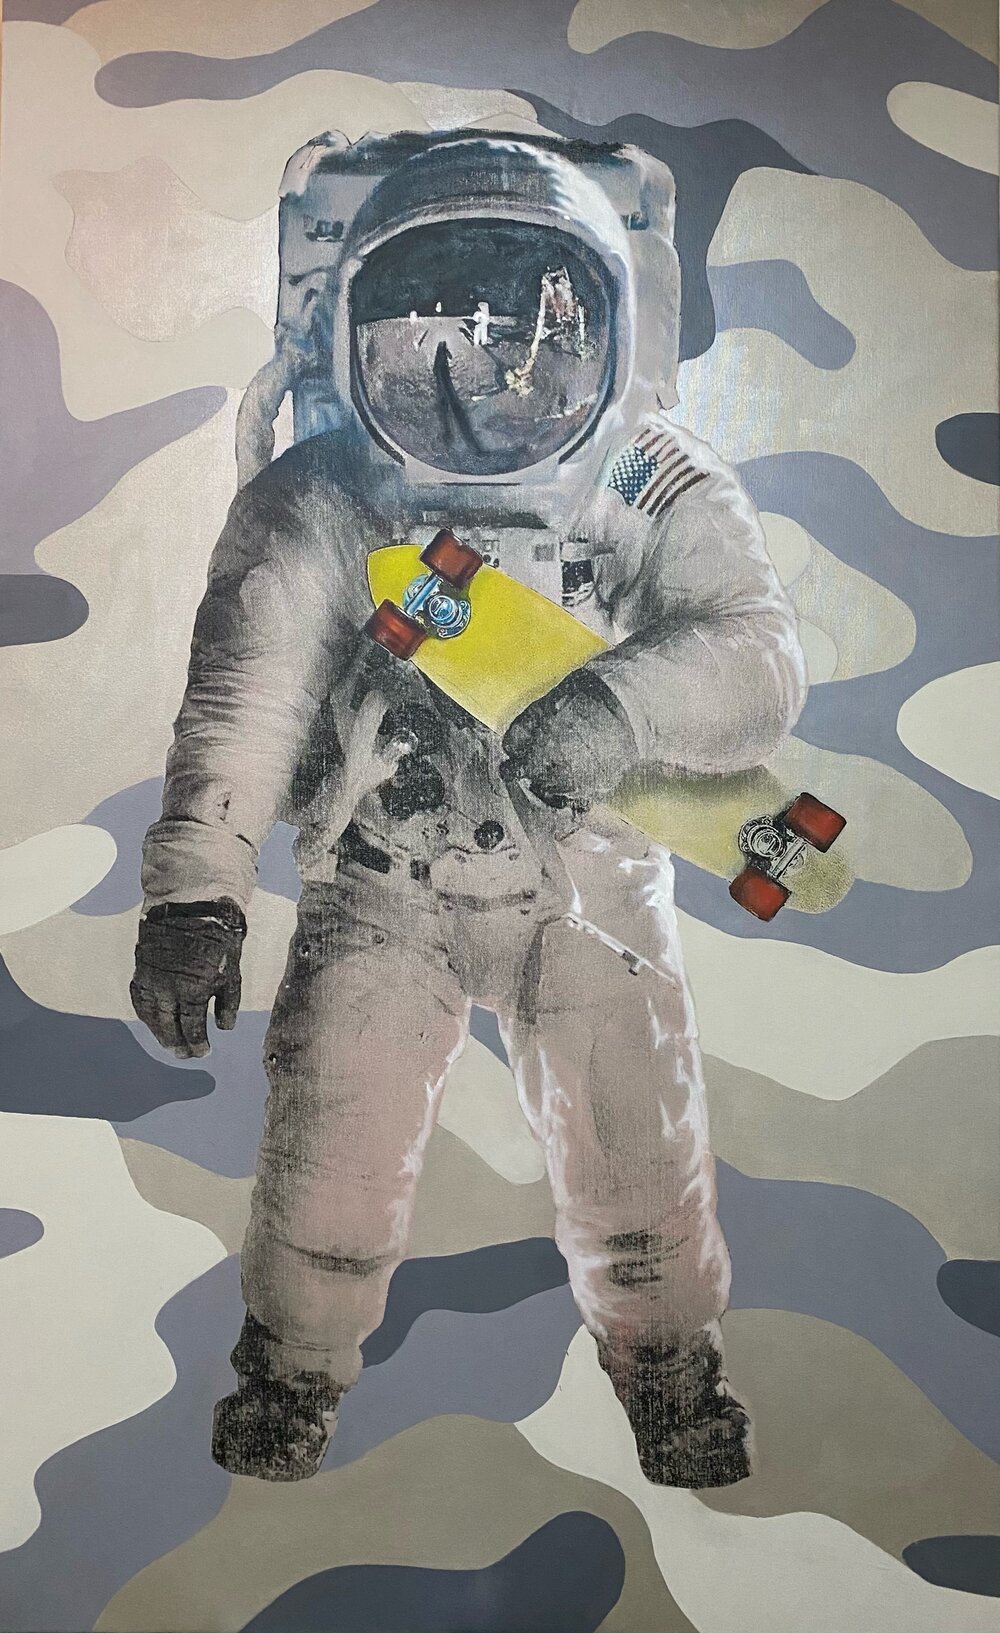   Camo Spaceboarder (Silver), 2021   Screen print and acrylic on canvas, 78 x 48 inches 